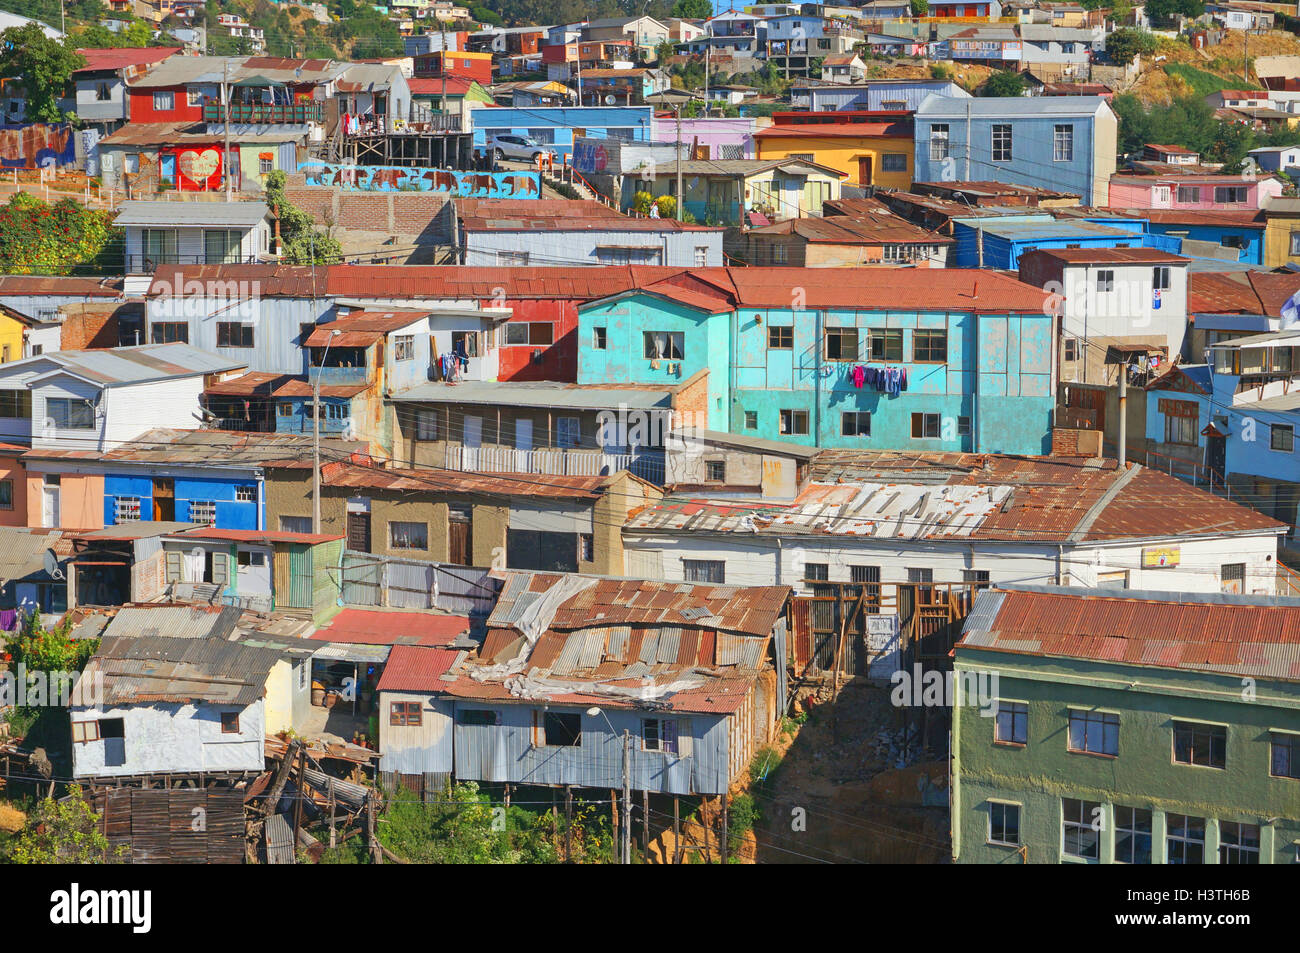 A view of the colorful city of Valparaiso, Chile Stock Photo